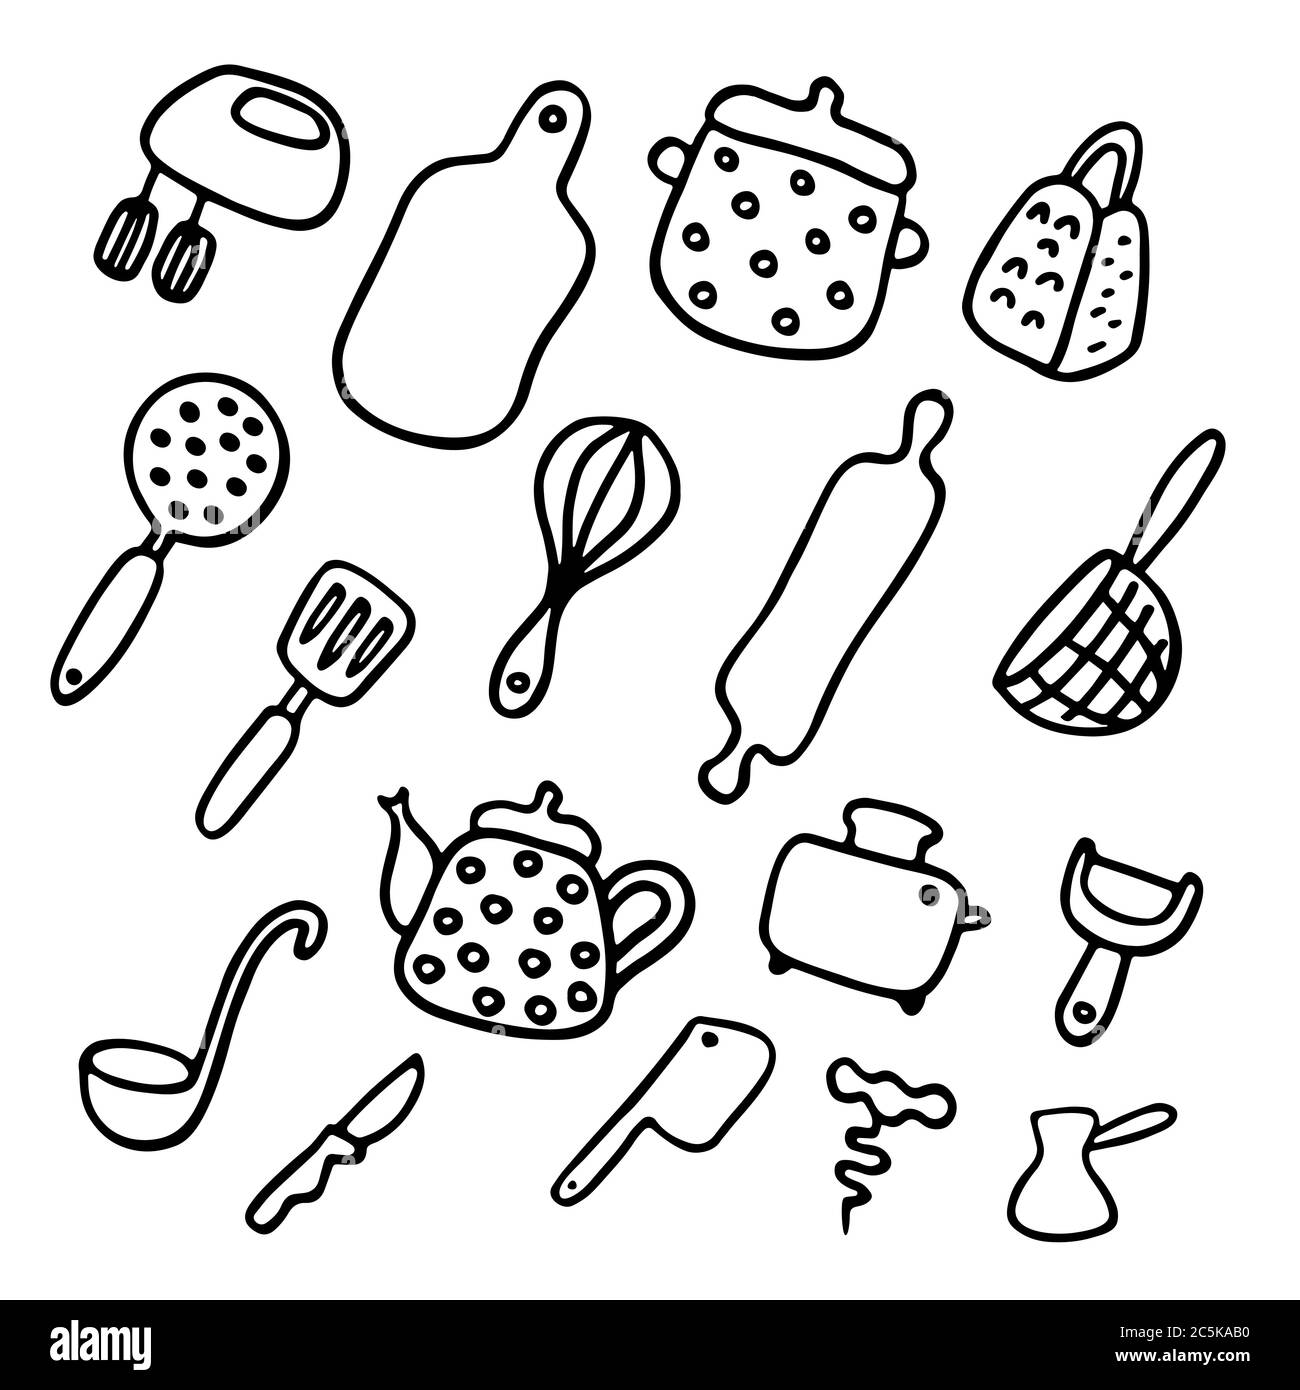 Doodle icons set of kitchen appliances and objects. Hand-drawn cooking items. Household appliances and housewares. Stock Vector